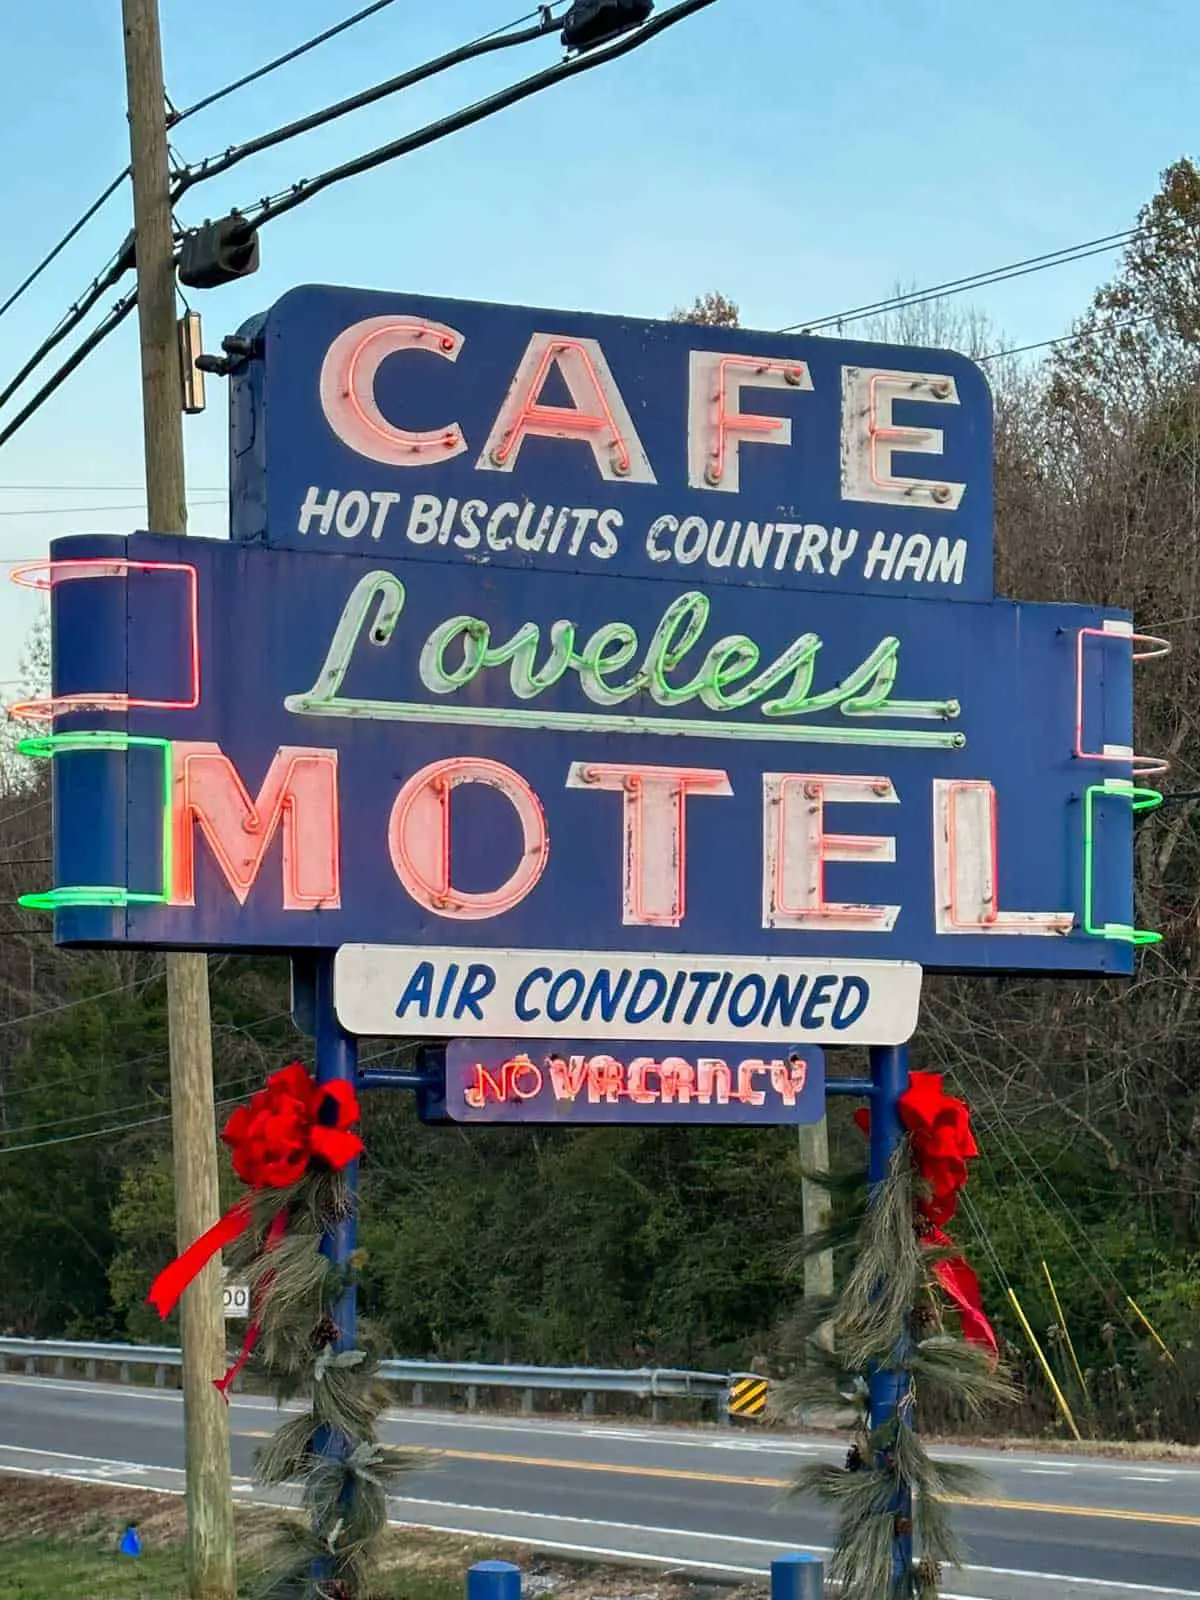 The Loveless Cafe sign which says cafe, Loveless Motel, air conditioned, no vacany, hot biscuits and country ham and the sign has red ribbons and wreaths wrapped around the poles.